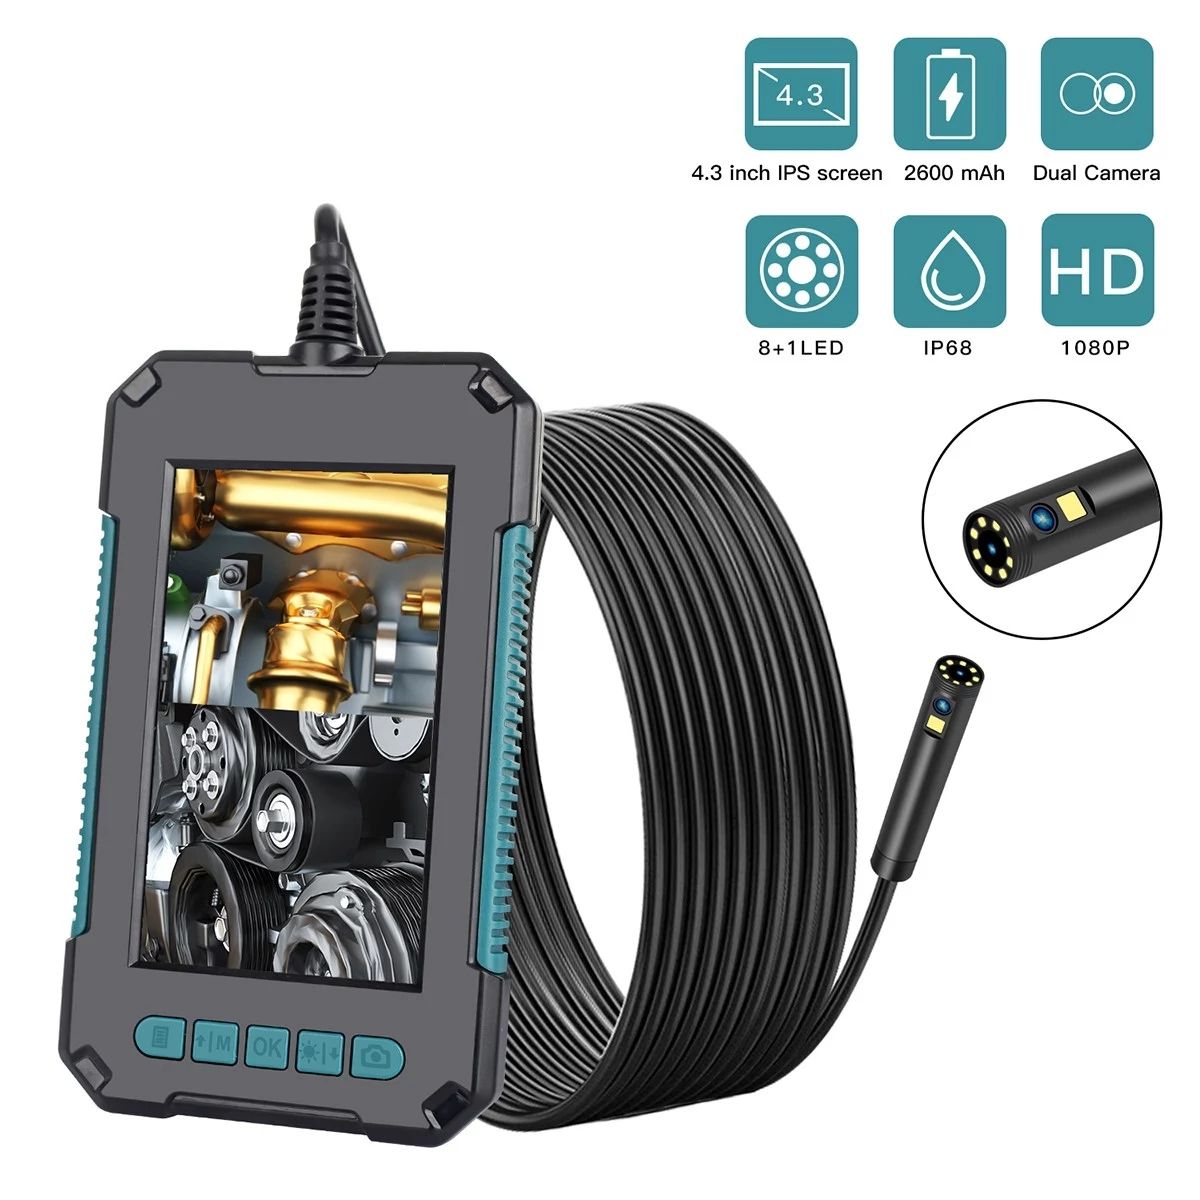 Handheld-Borescope-43-Inches-IPS-Screen-1080P-High-Definition-IP68-Industrial-Borescope-with-9-LEDs--1757754